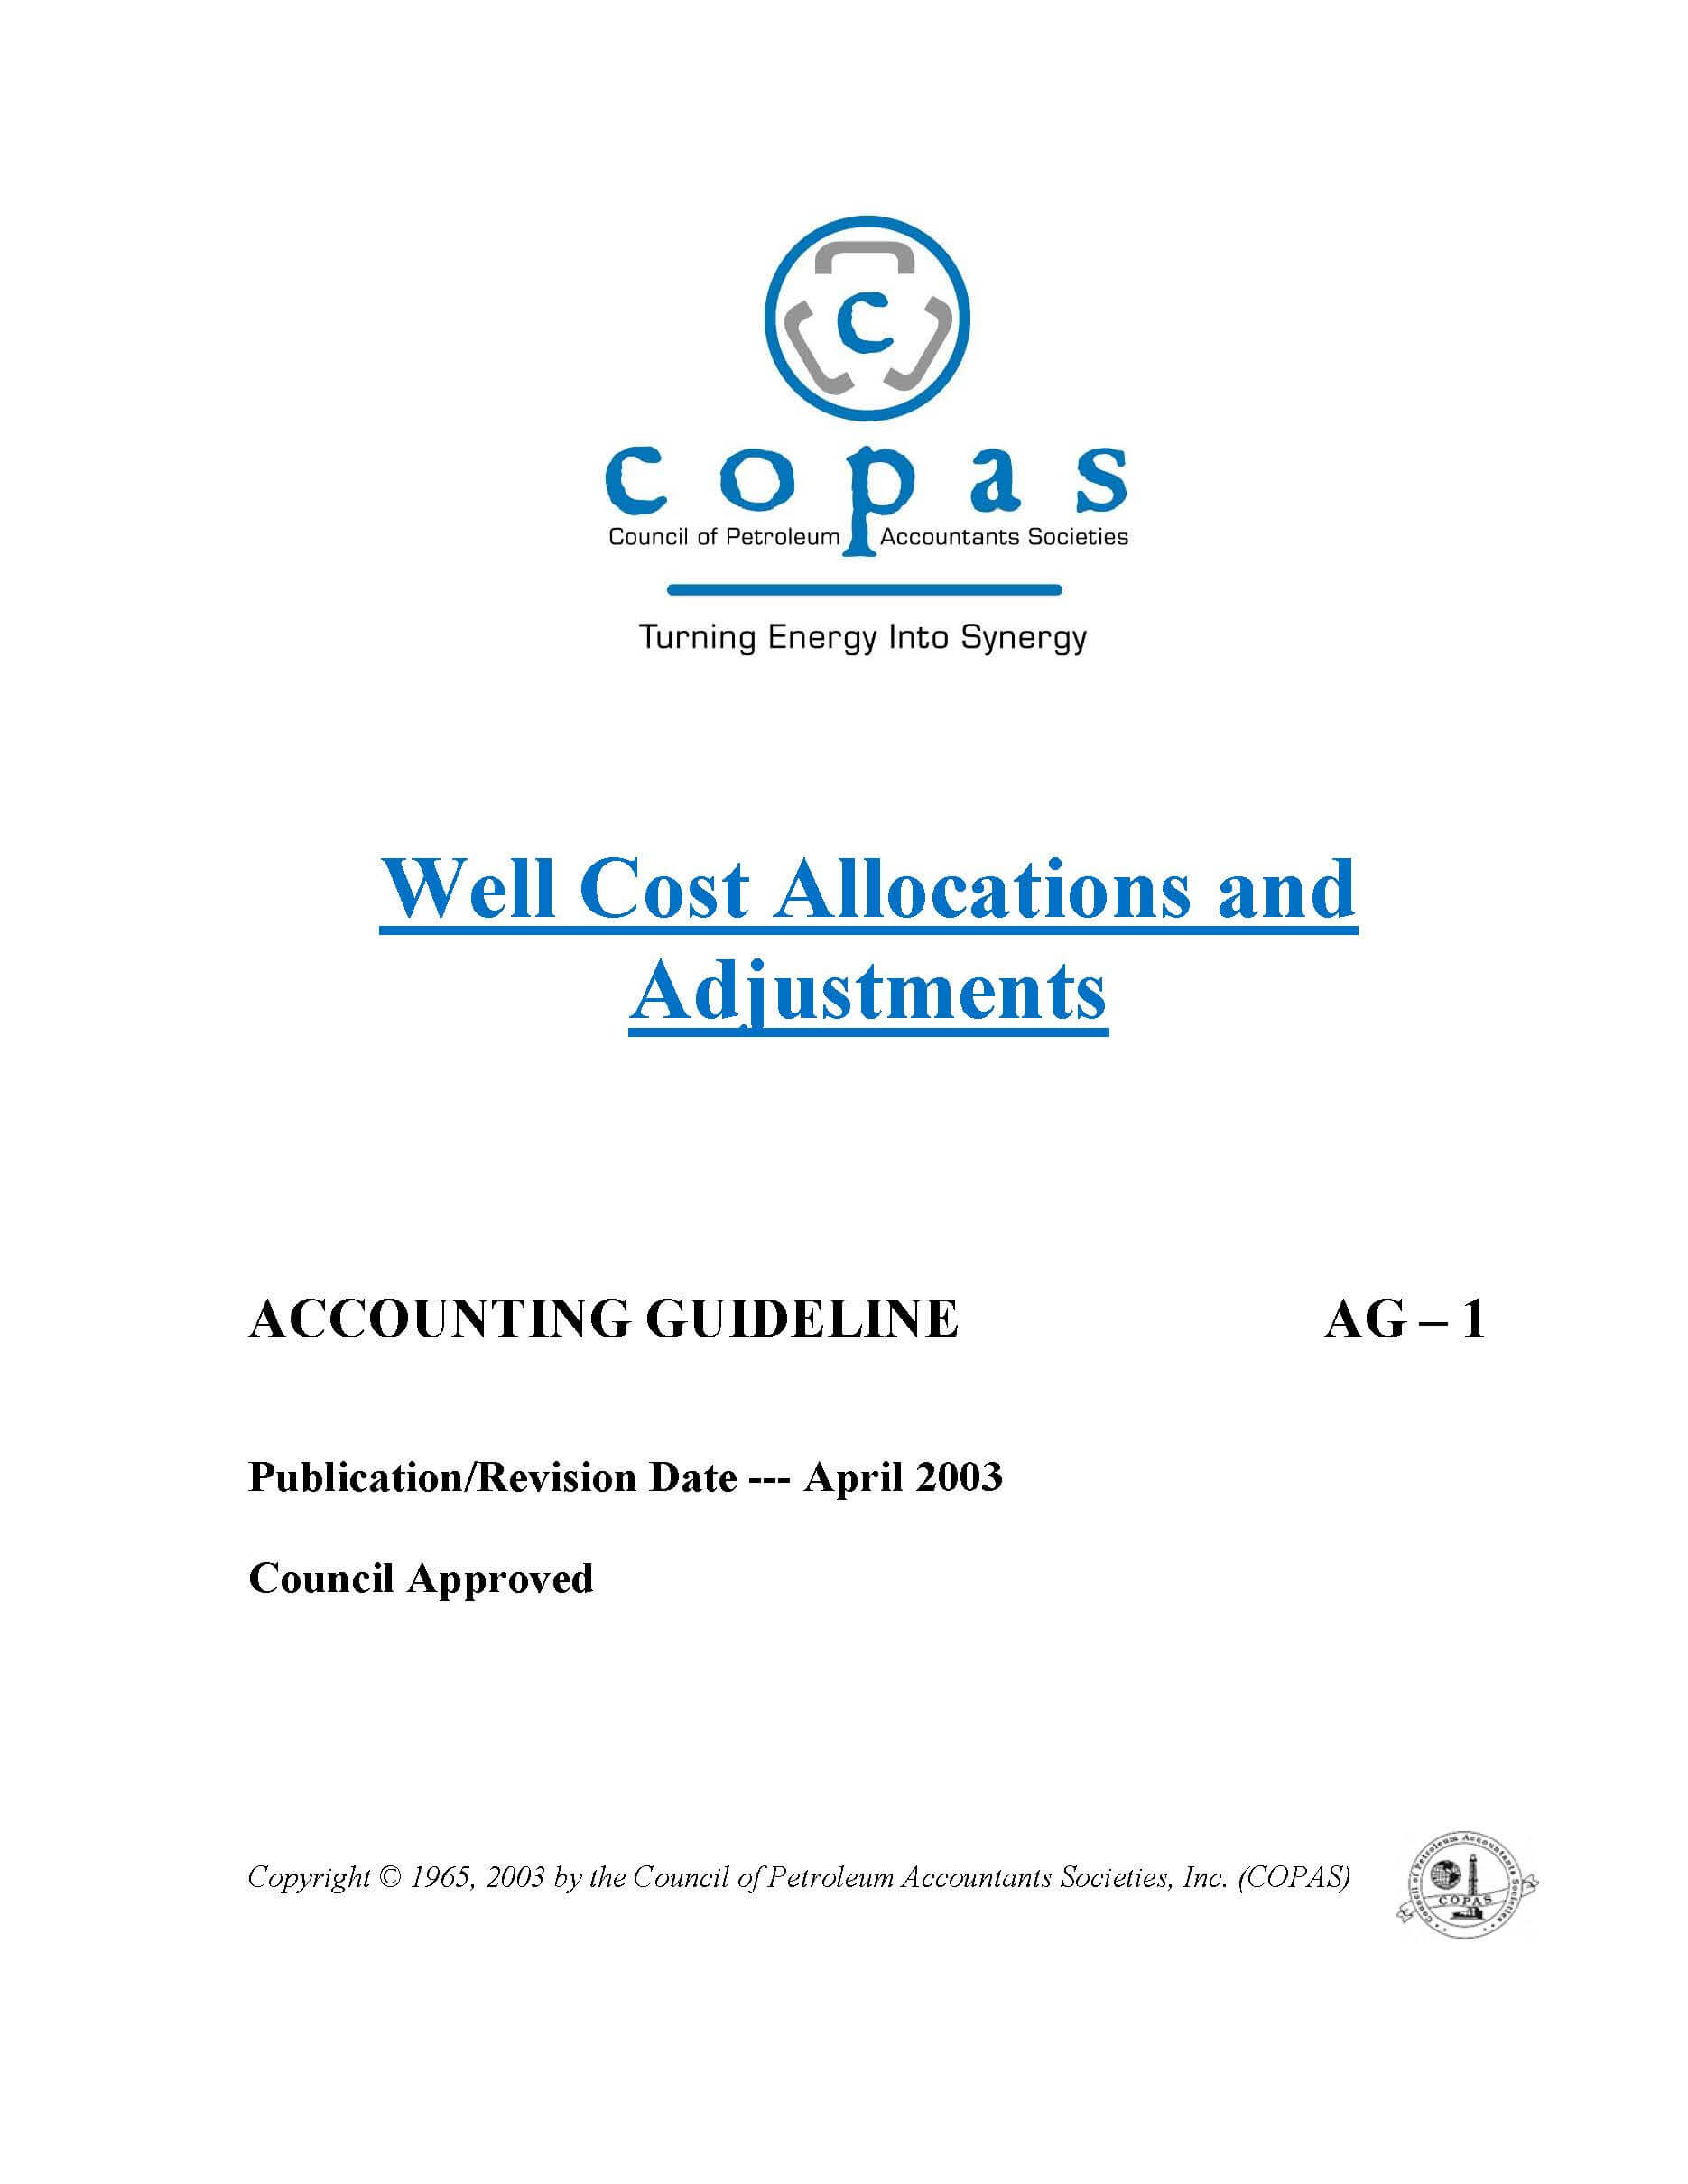 AG-1 Well Cost Allocations and Adjustments